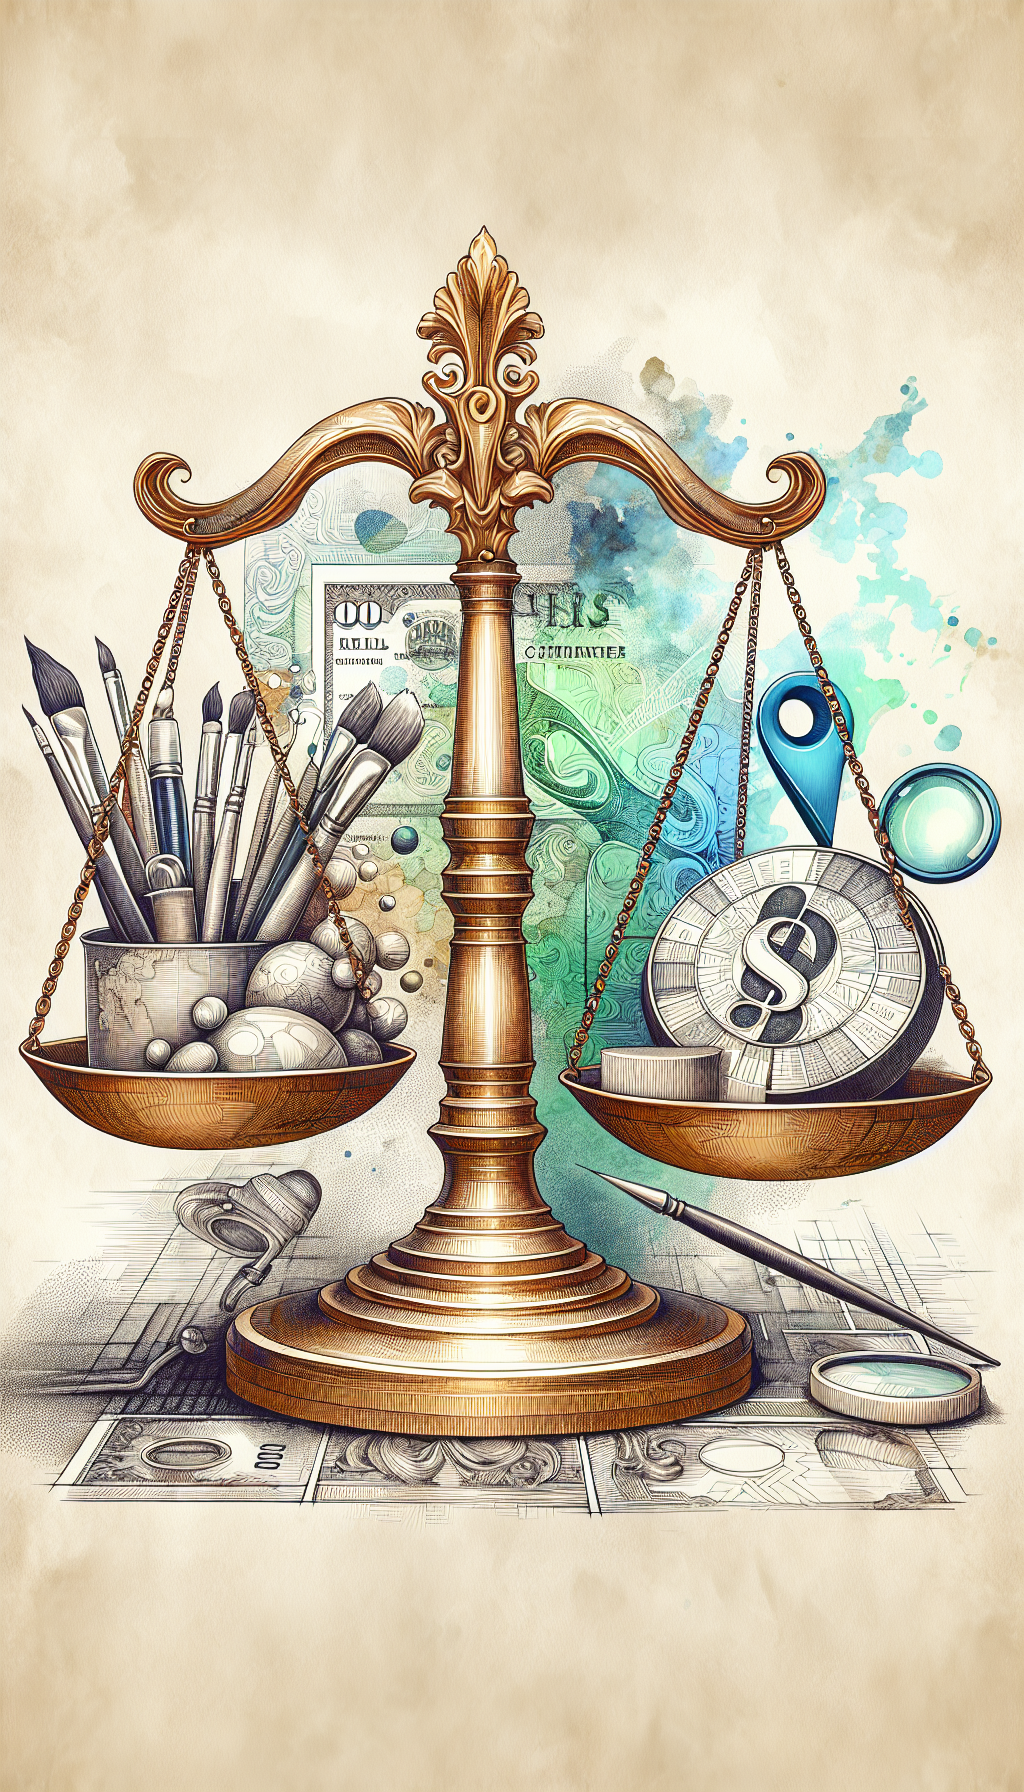 An intricate balance scale, with one side depicting iconic art symbols (a palette, brush, and canvas) weighed against a golden certificate embossed with "Certified Appraiser" on the other. A magnifying glass looms above, pinpointing a location pin symbolizing "near me," against an abstract, currency-style backdrop to symbolize value. Each aspect melds in a collage of watercolor, line art, and photorealistic styles.